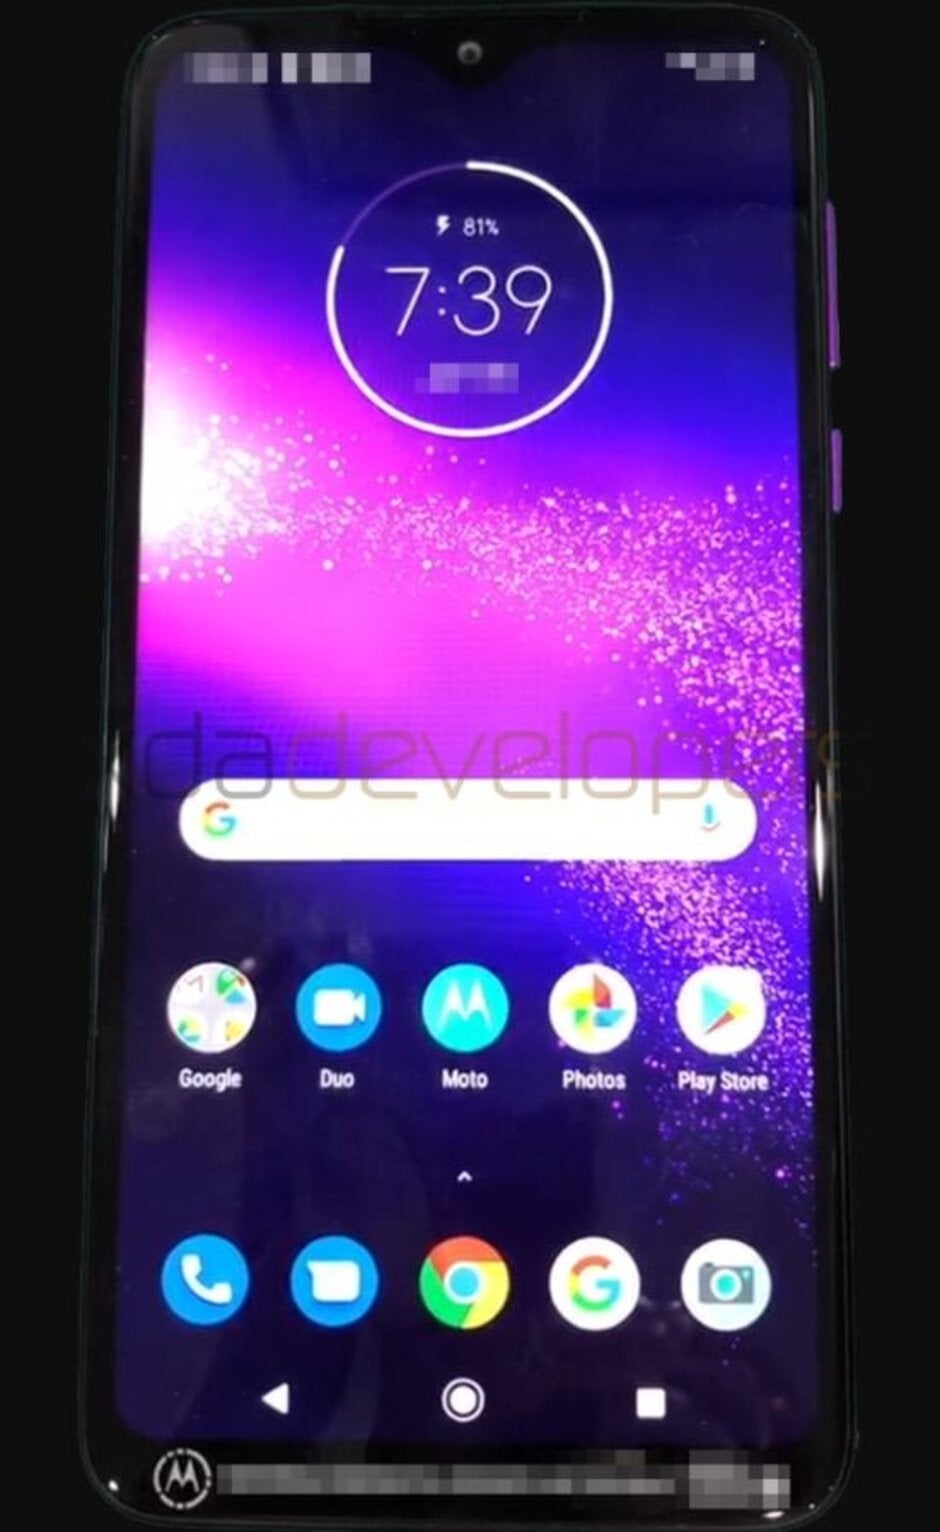 The Motorola One Macro could land soon with a cool camera feature